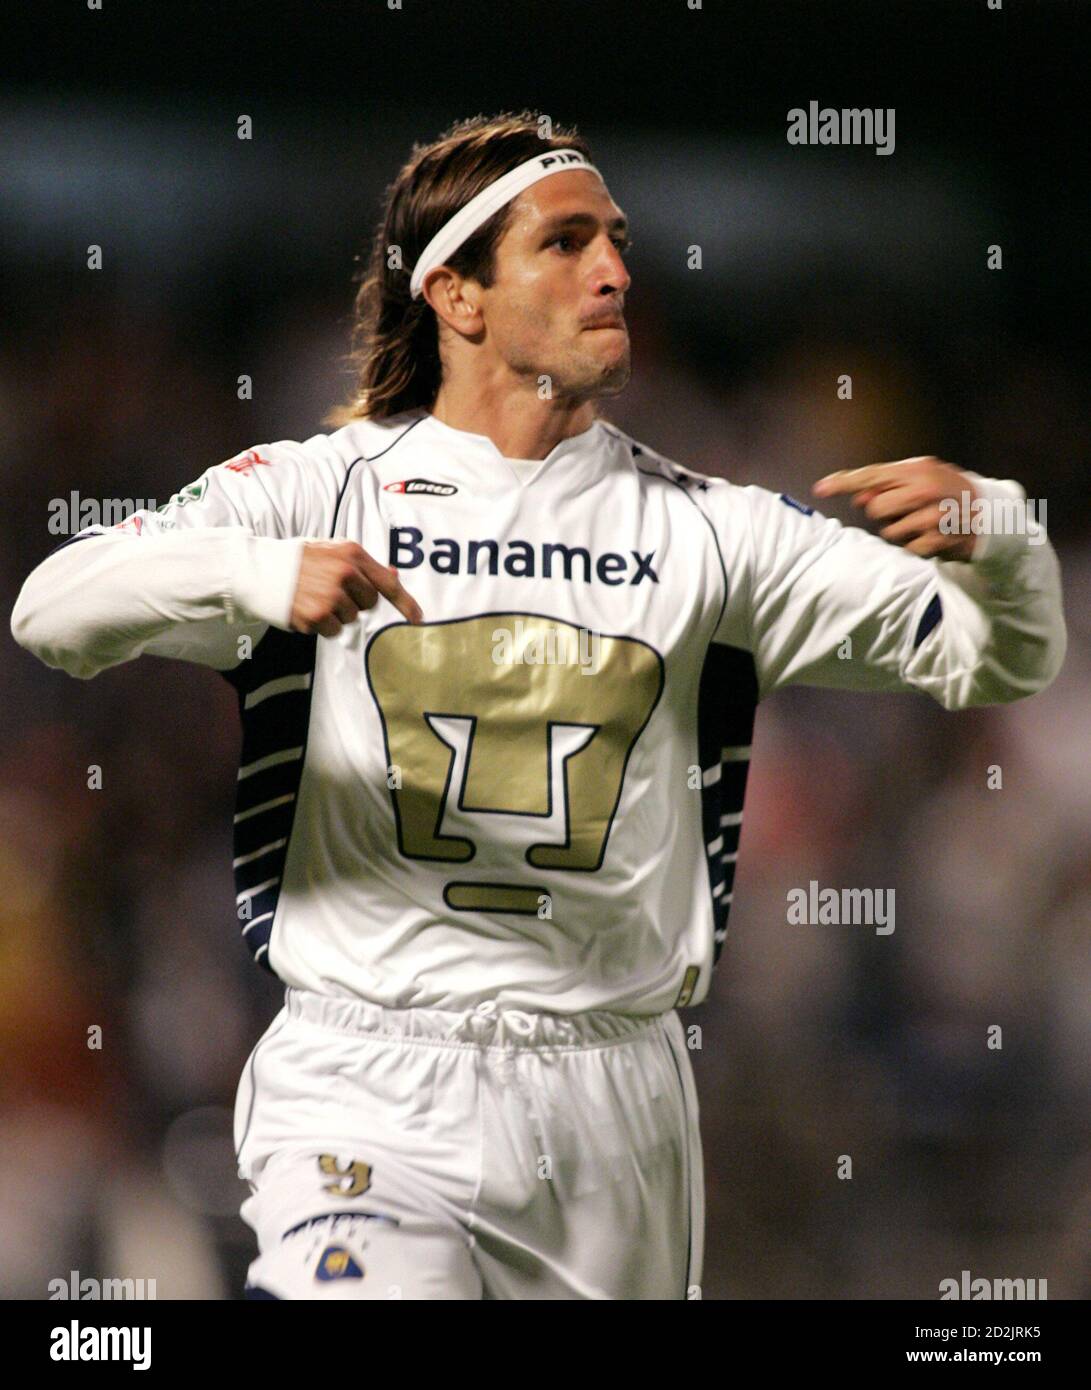 Pumas' Bruno Marioni celebrates after scoring a goal against Corinthians in  the second half of their Copa Sudamericana quarter-final soccer match in  University Stadium in Mexico City November 9, 2005. REUTERS/Daniel Aguilar